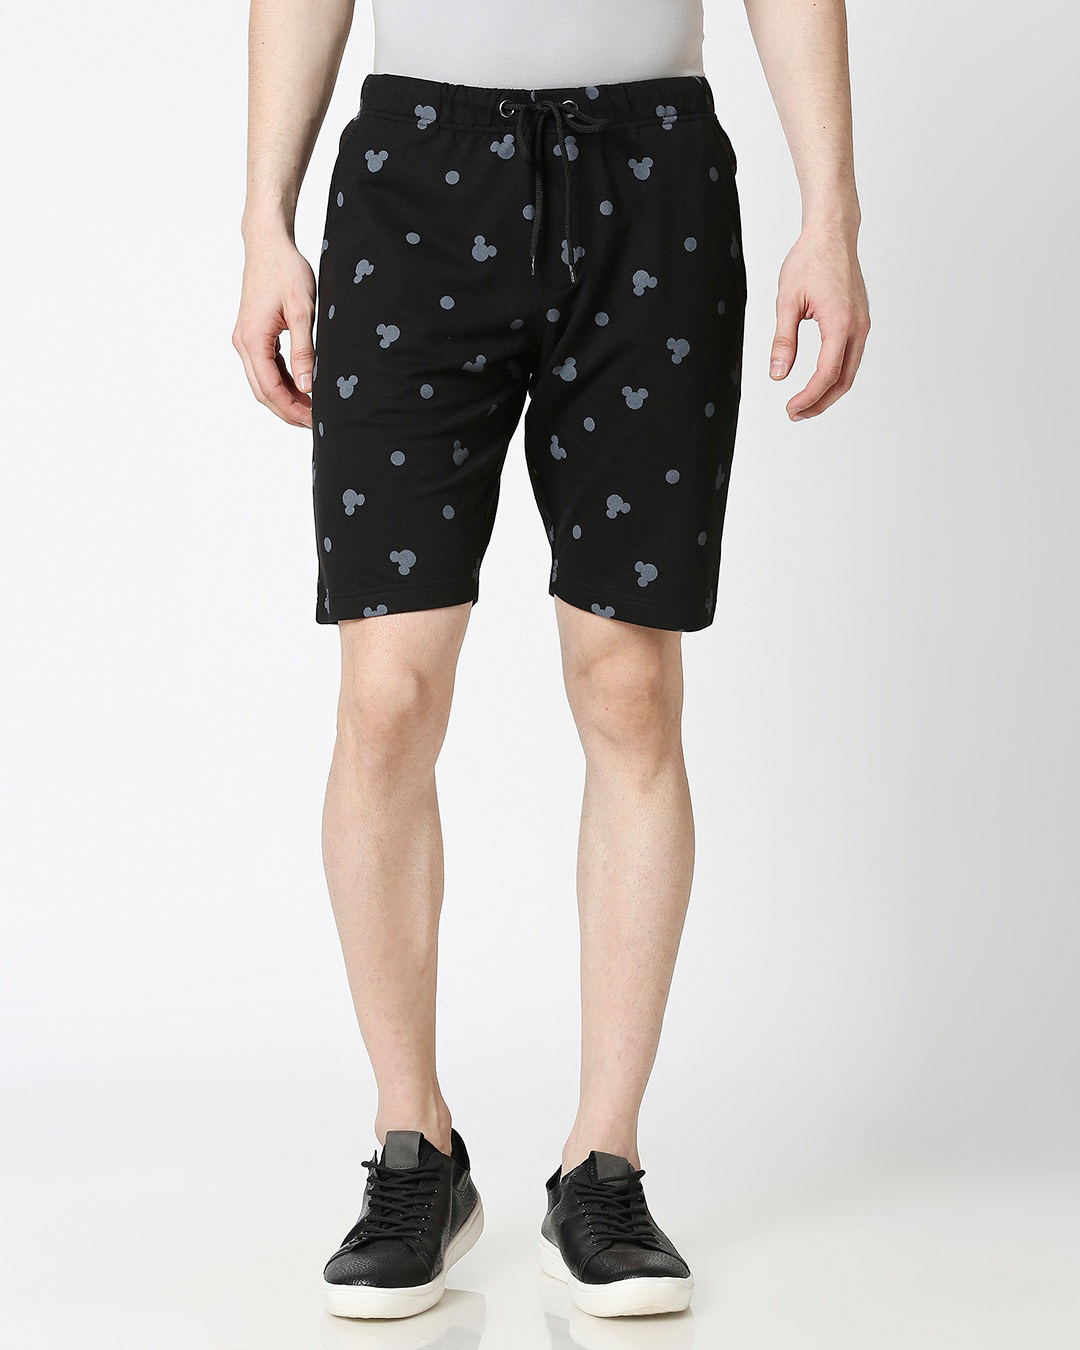 Shop Mickey silhouette AOP Shorts(DL)-Back